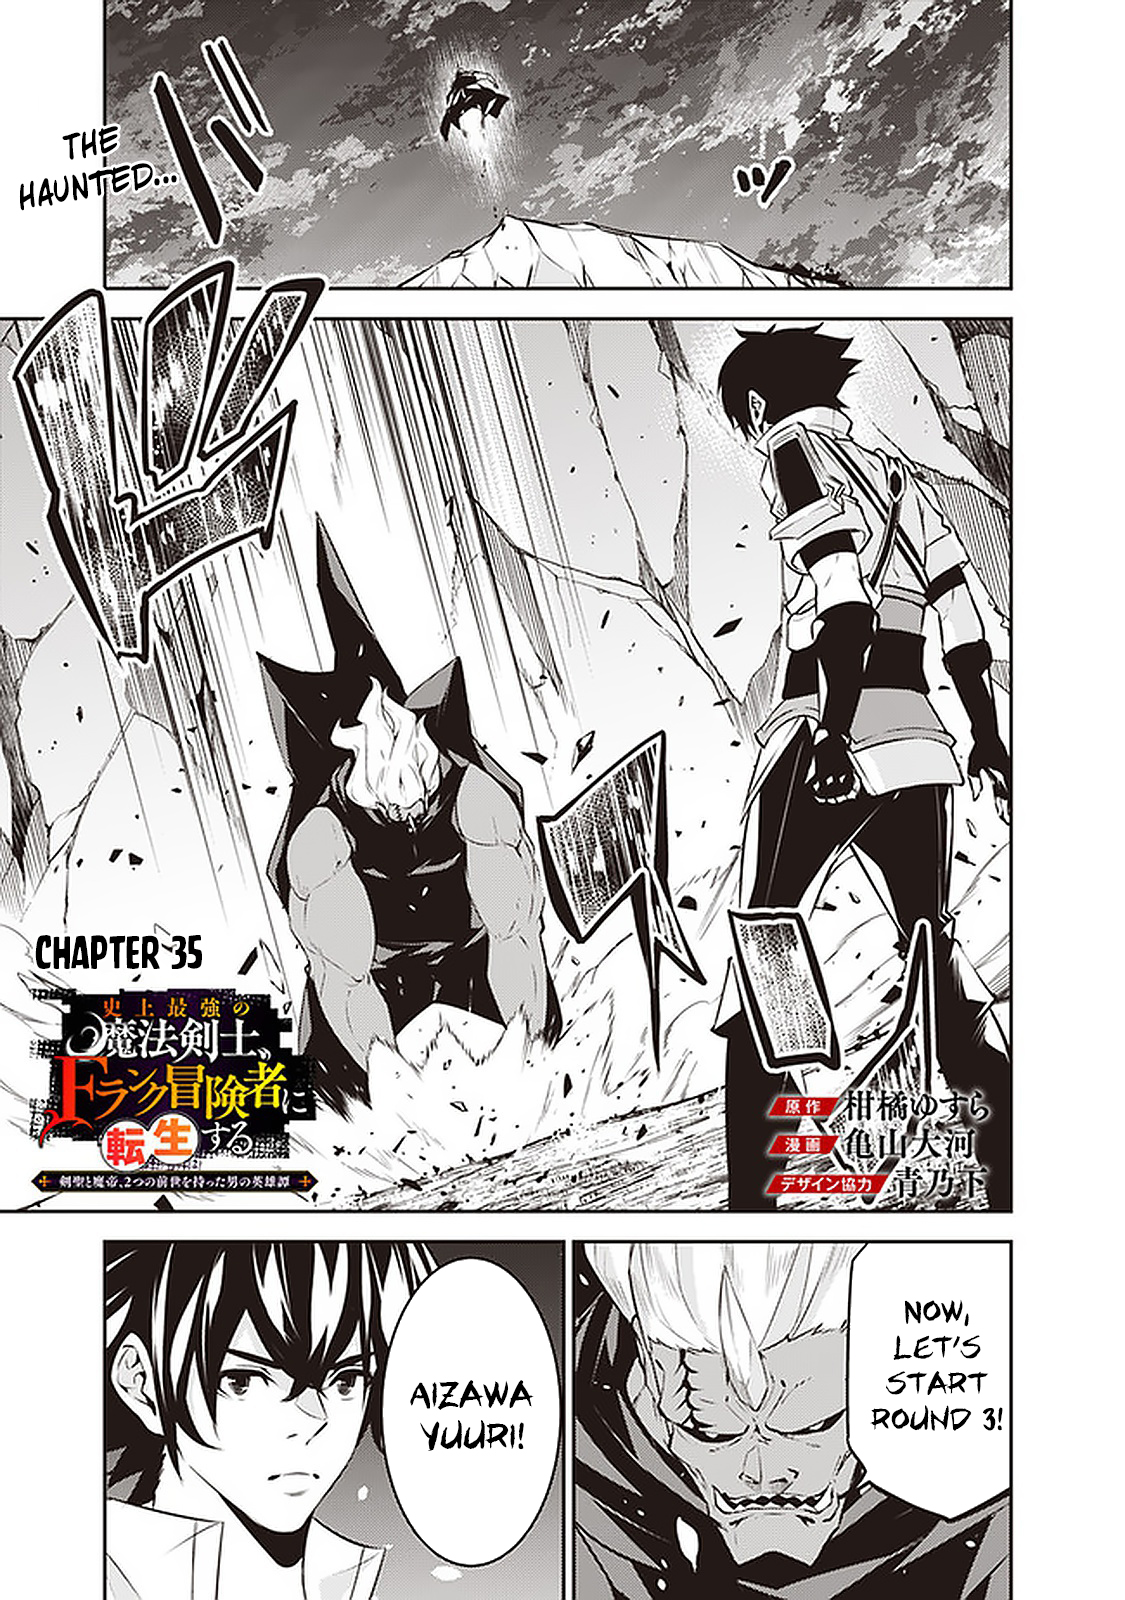 The Strongest Magical Swordsman Ever Reborn As An F-Rank Adventurer. - Page 2